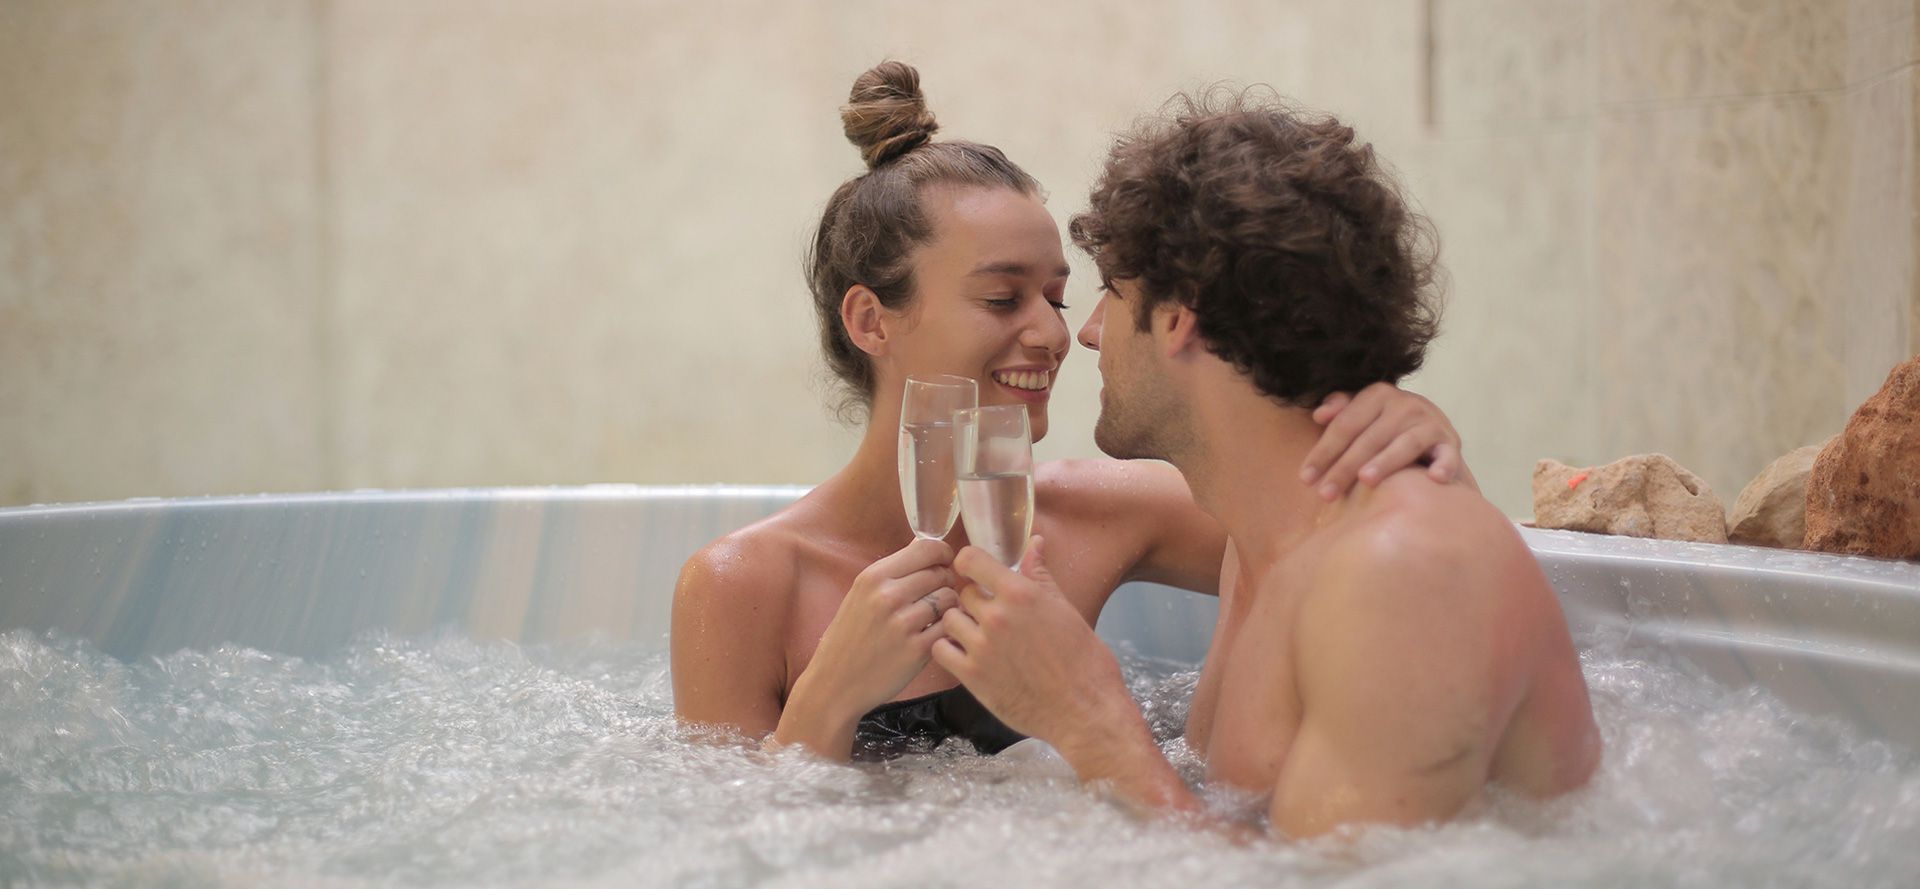 Date with millionaire in jacuzzi.